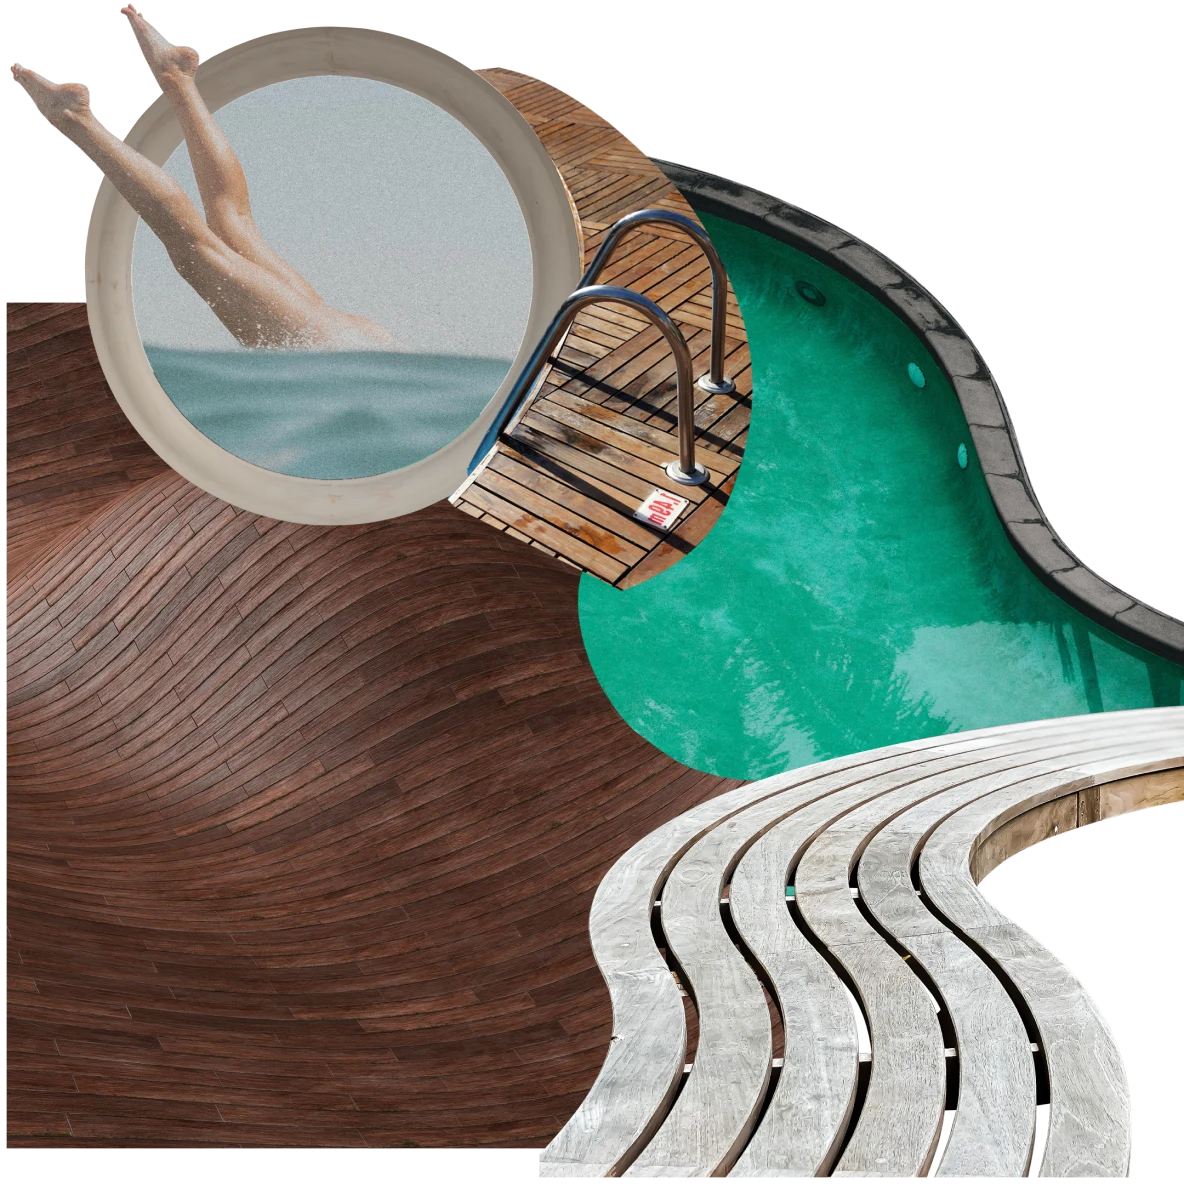 Collage of pool-themed items. Legs diving into water inside a round hot tub are seen from an aerial view. A curved walkway is beside a dark wood panel and the edge of a swimming pool.